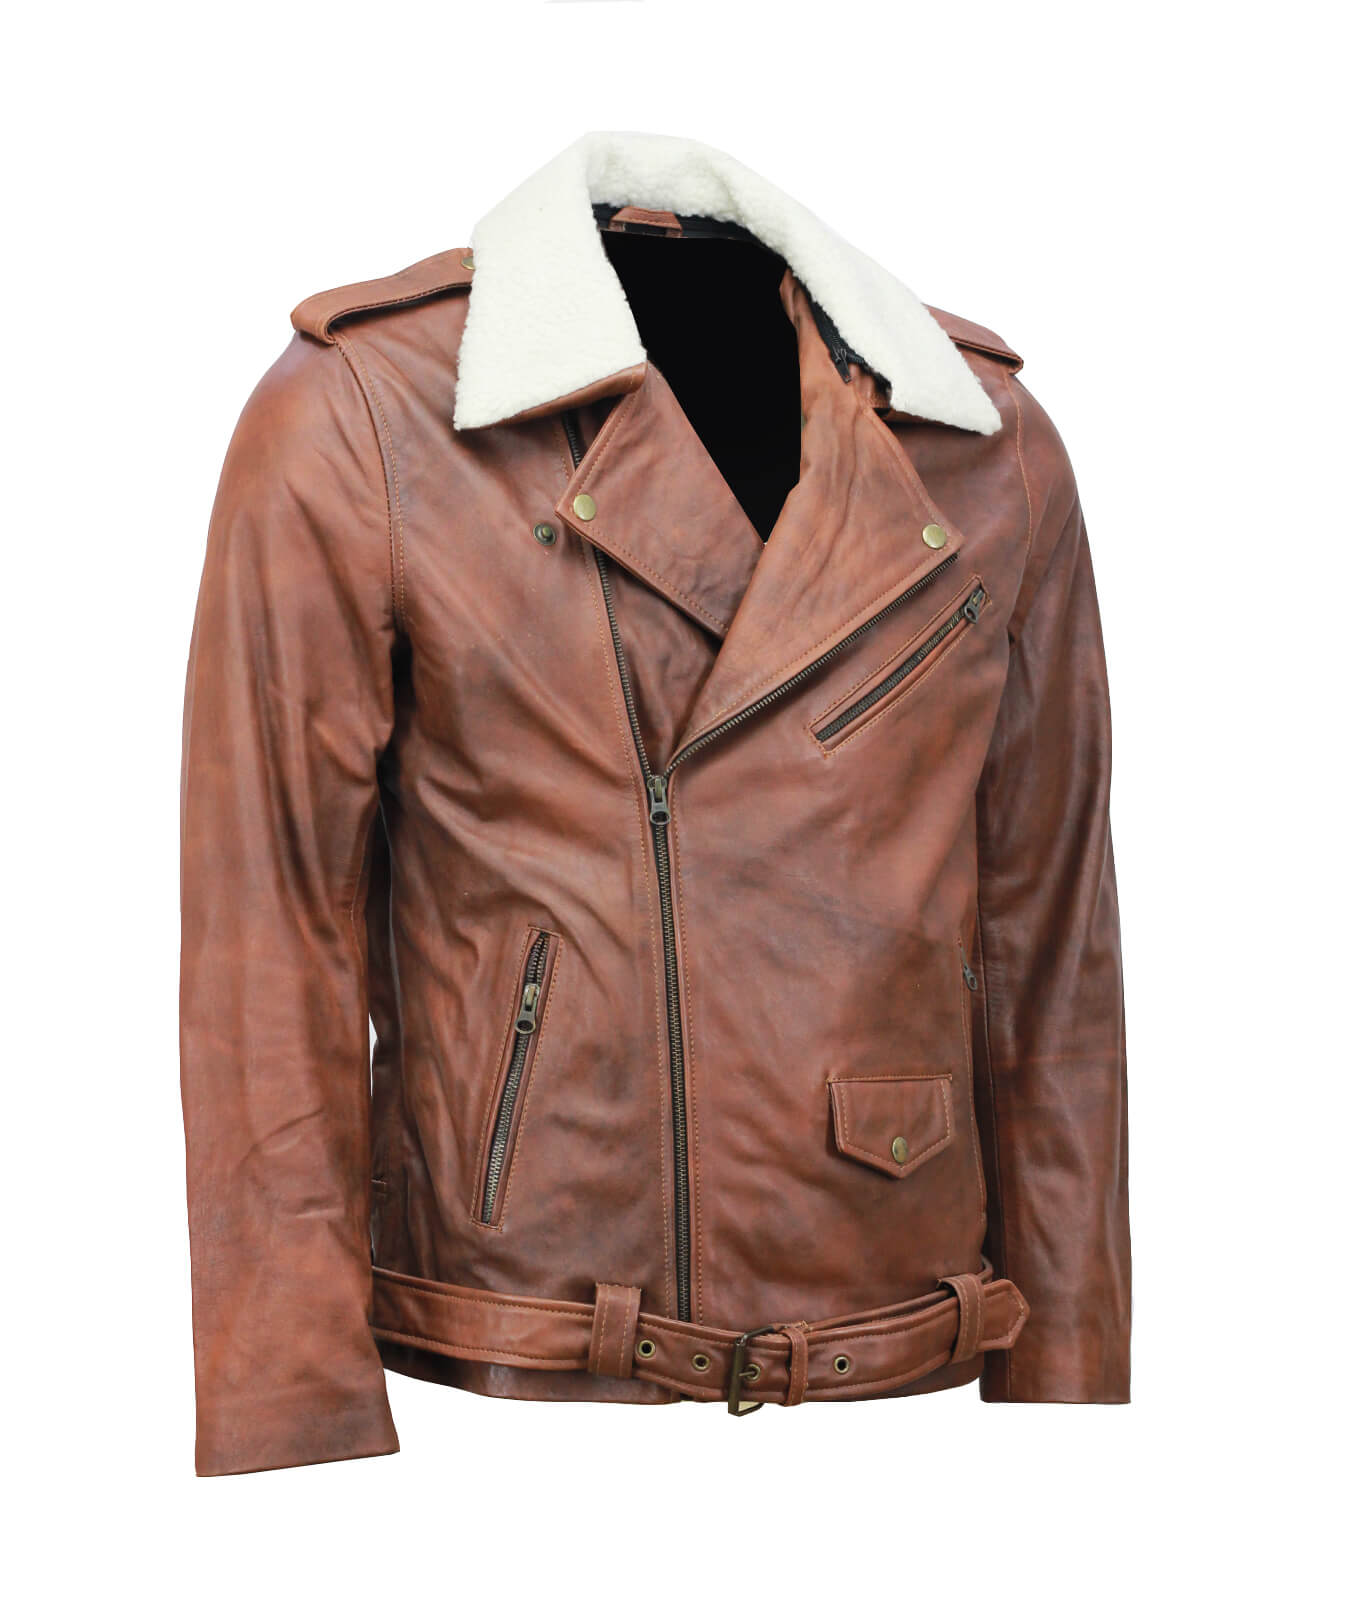 Vintage Brown Motorcycle Leather Jacket With Fur Collar And Belt